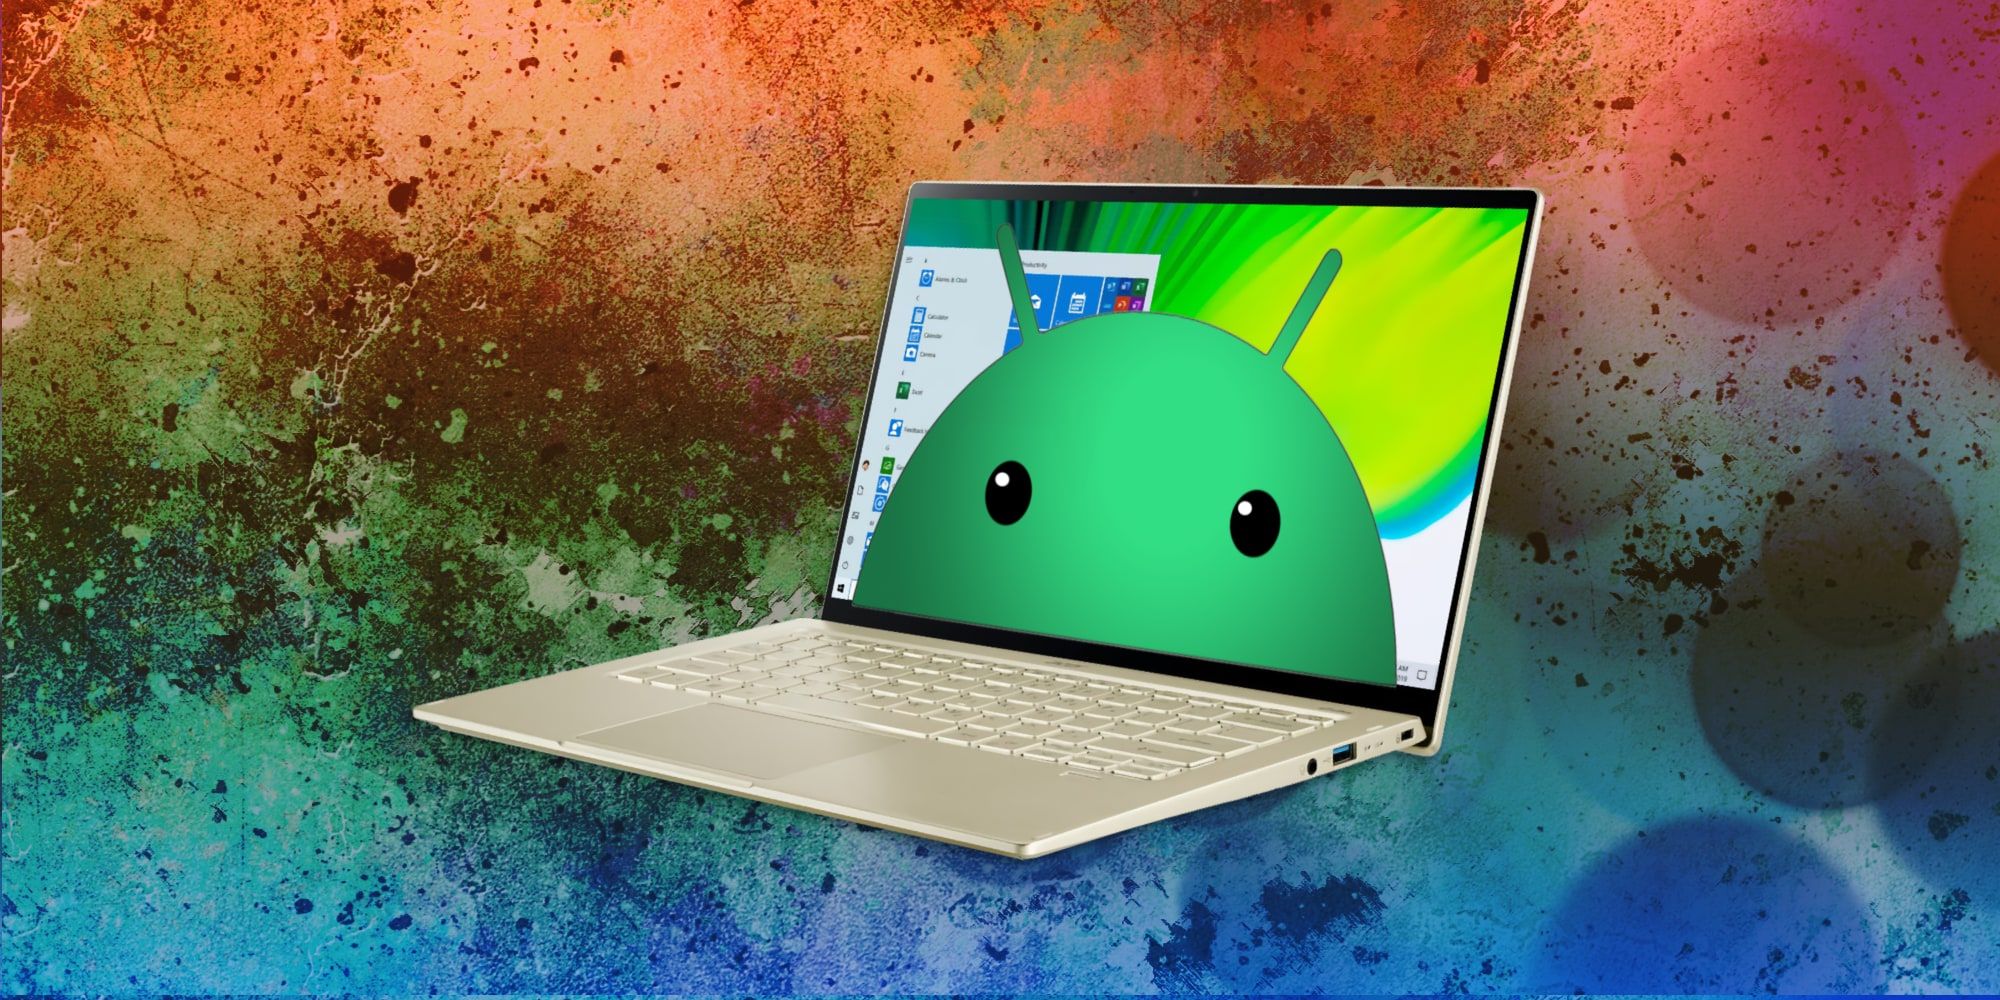 Windows 11 Laptop With Android Logo On-Screen